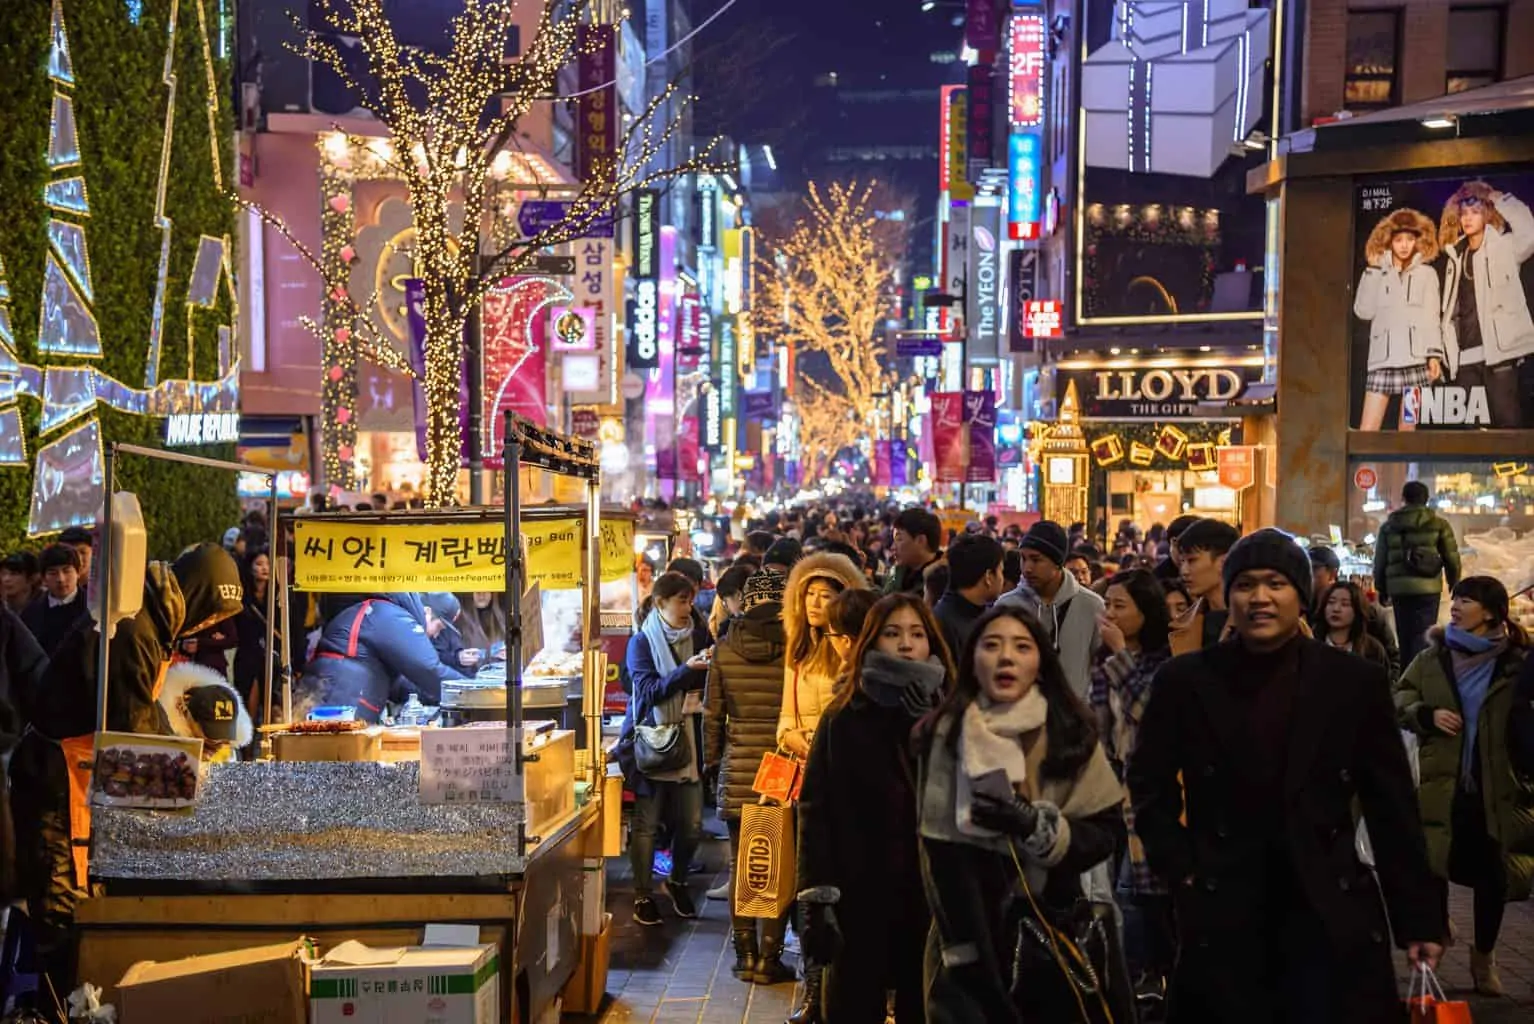 Crowd of people that drives one of the main streets of Seoul during the holiday season